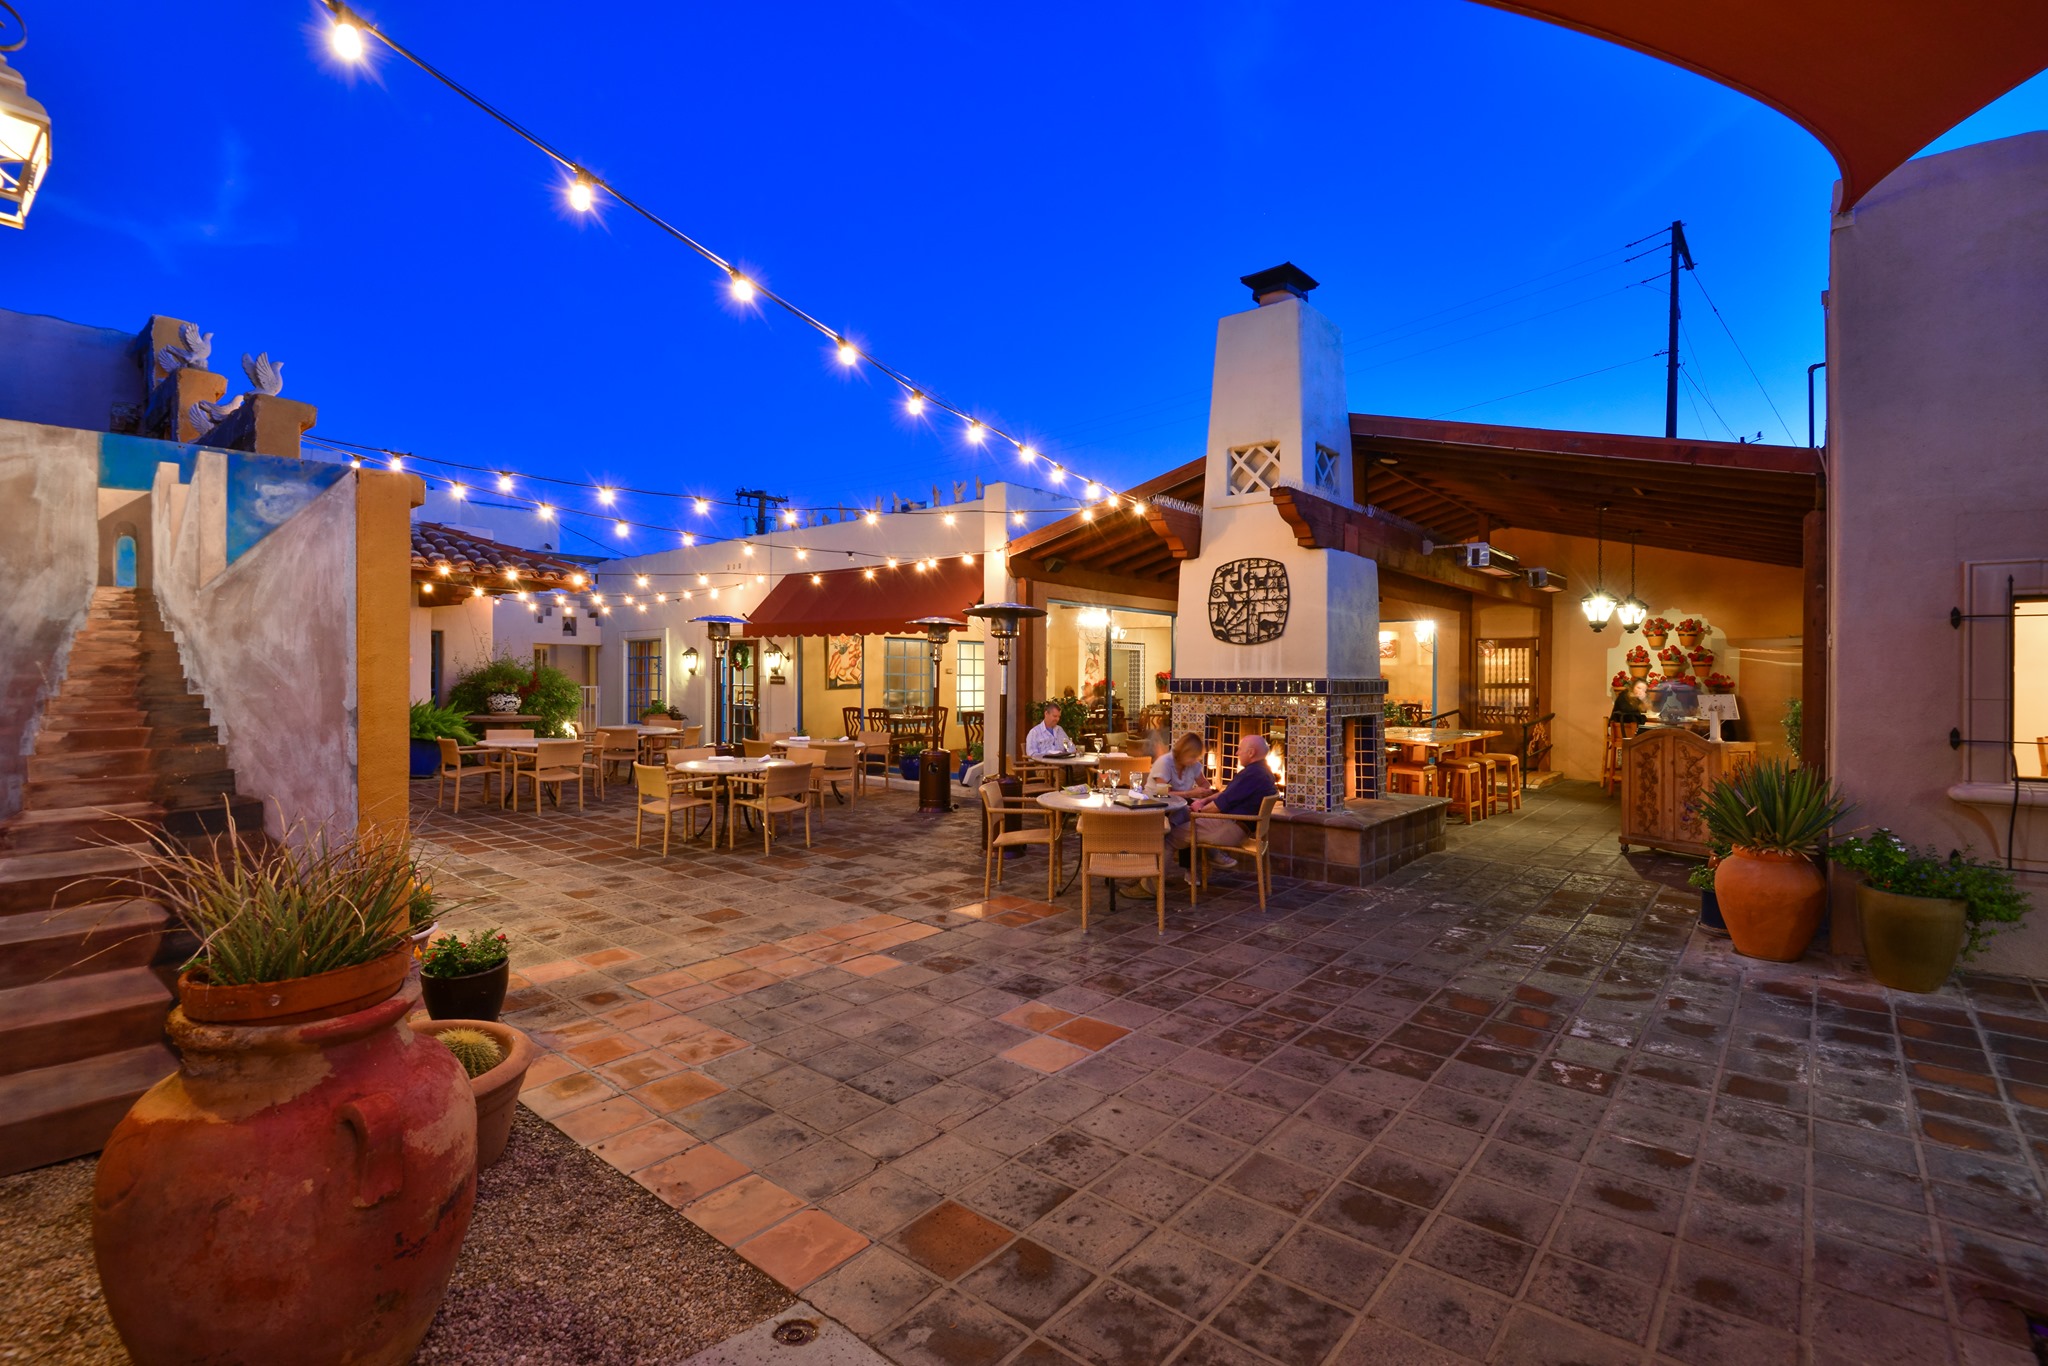 Patio at Cielos at Lodge on the Desert (Photo courtesy of Lodge on the Desert)